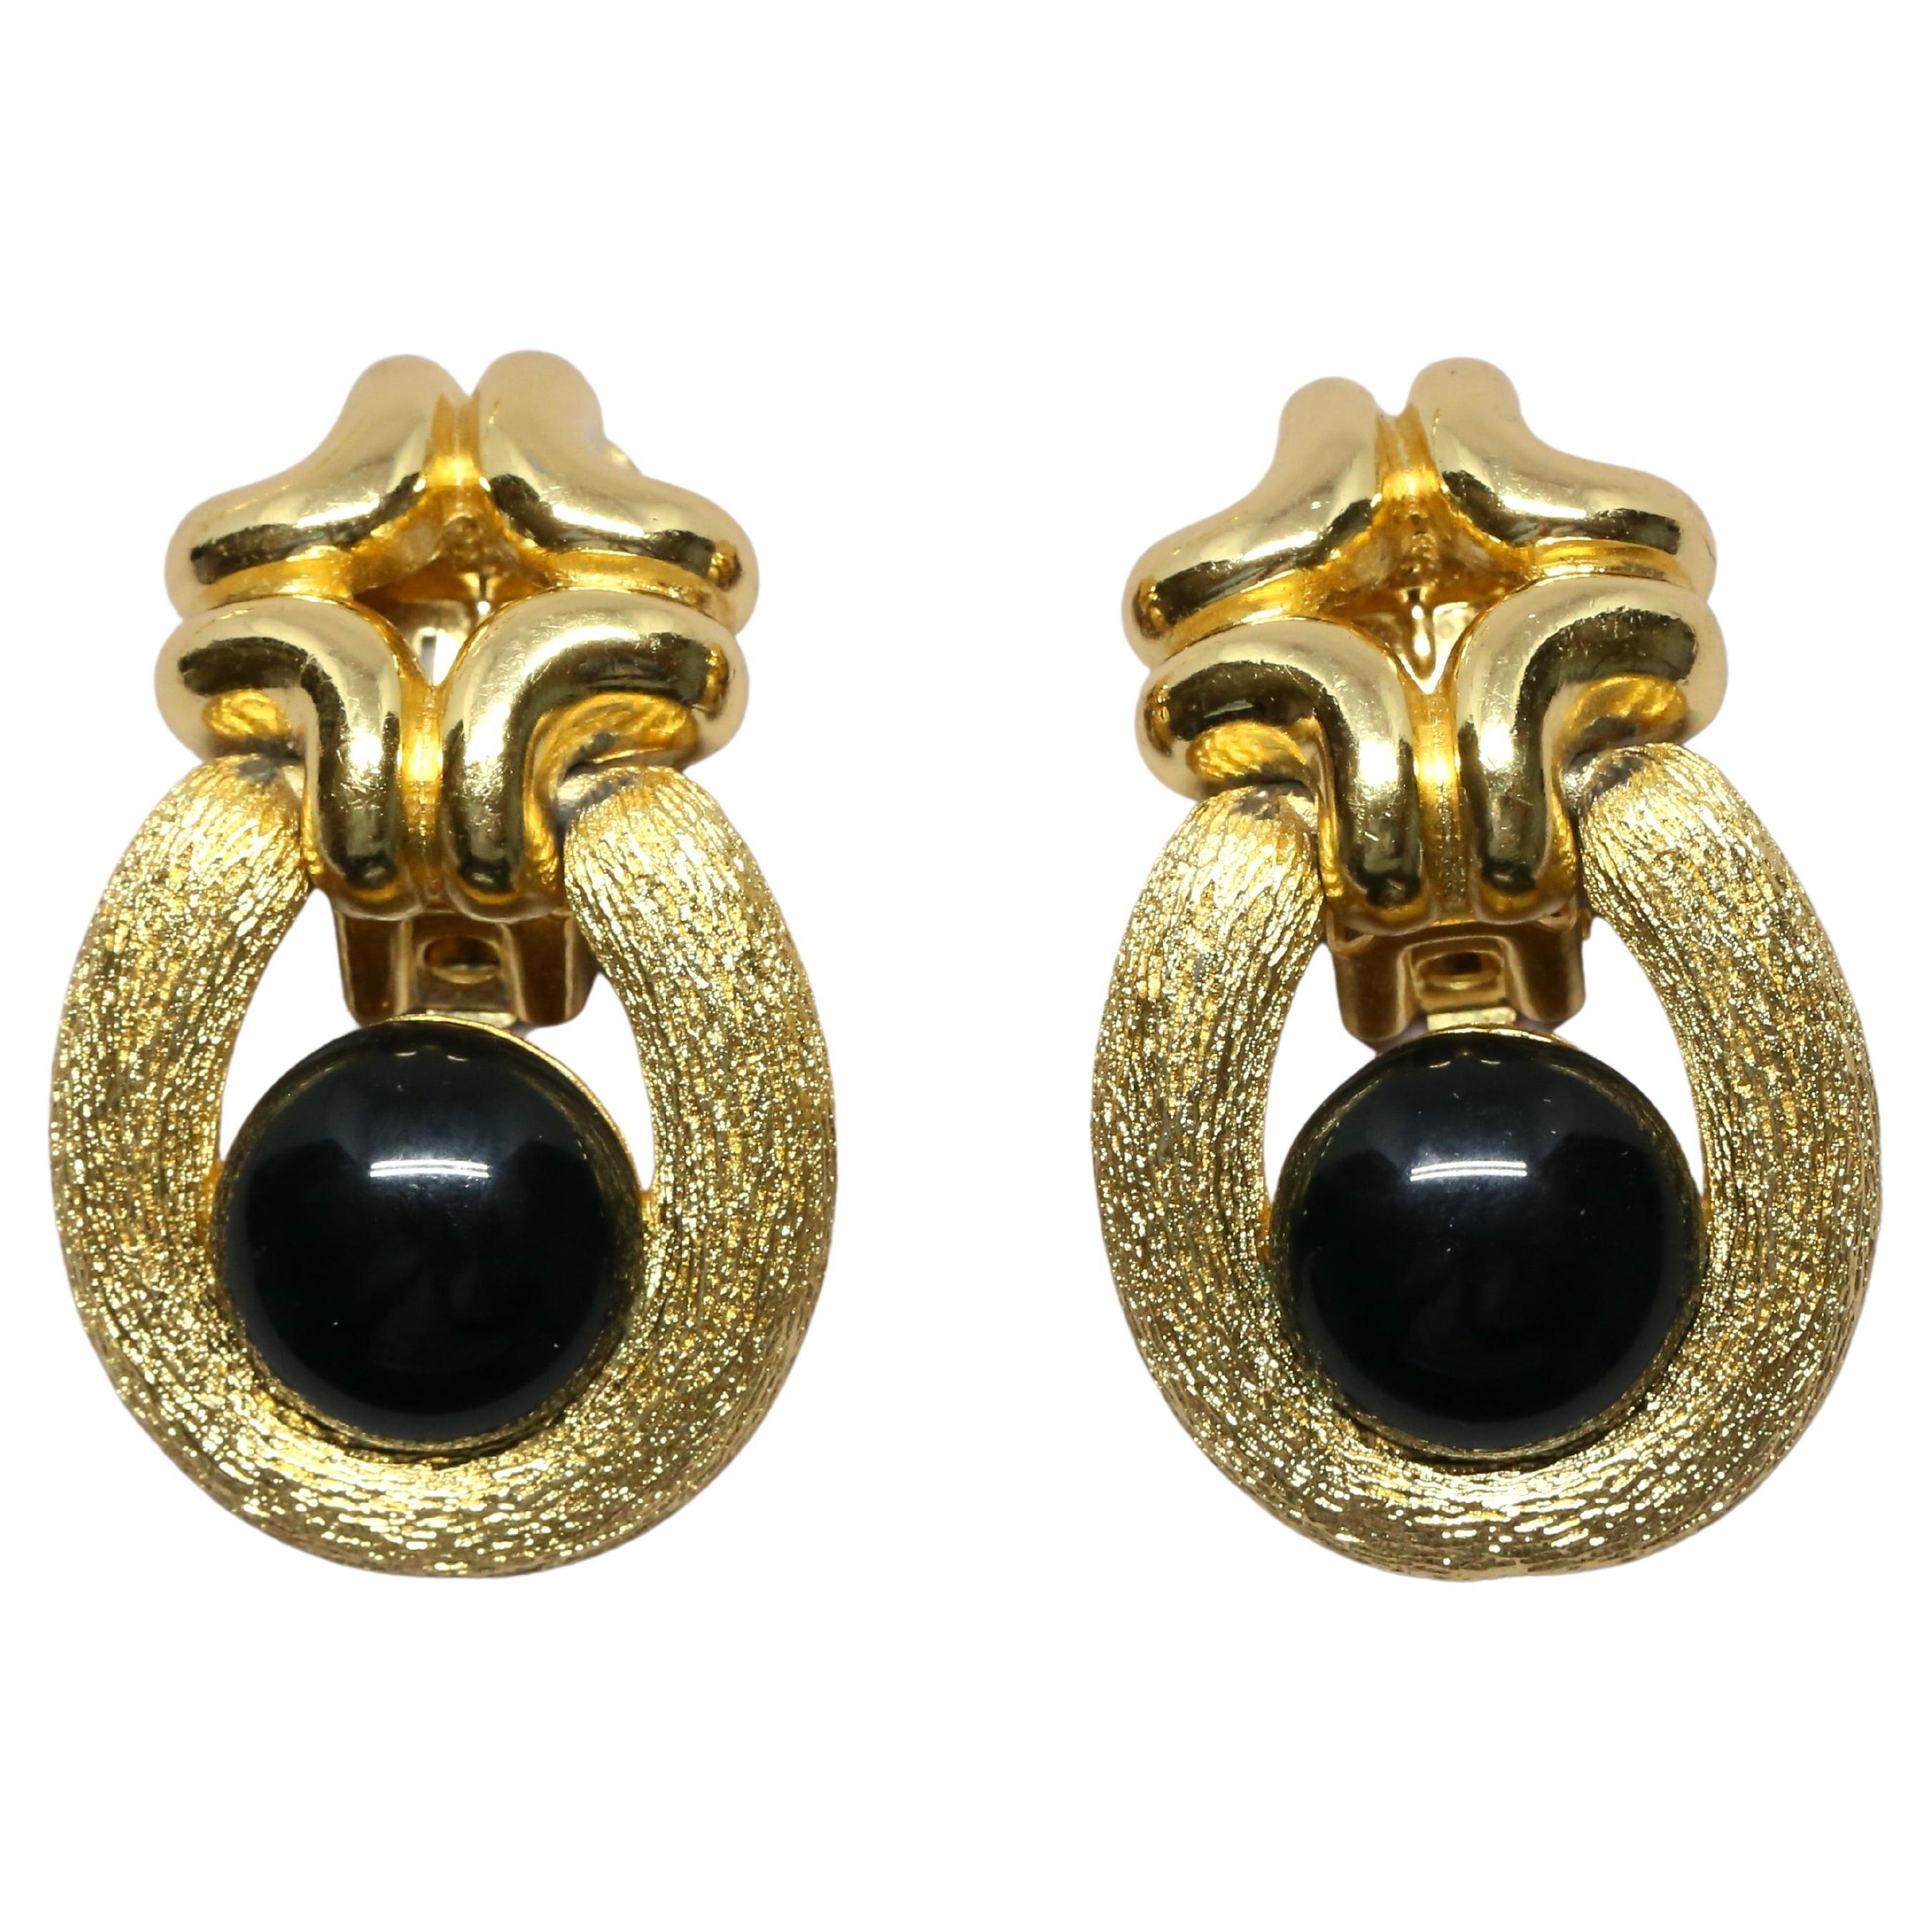 Textured, gilt metal earrings with jet black cabochons from Christian Dior dating to the 1980's. Clip backs. Approximate measurement: just under 1.75